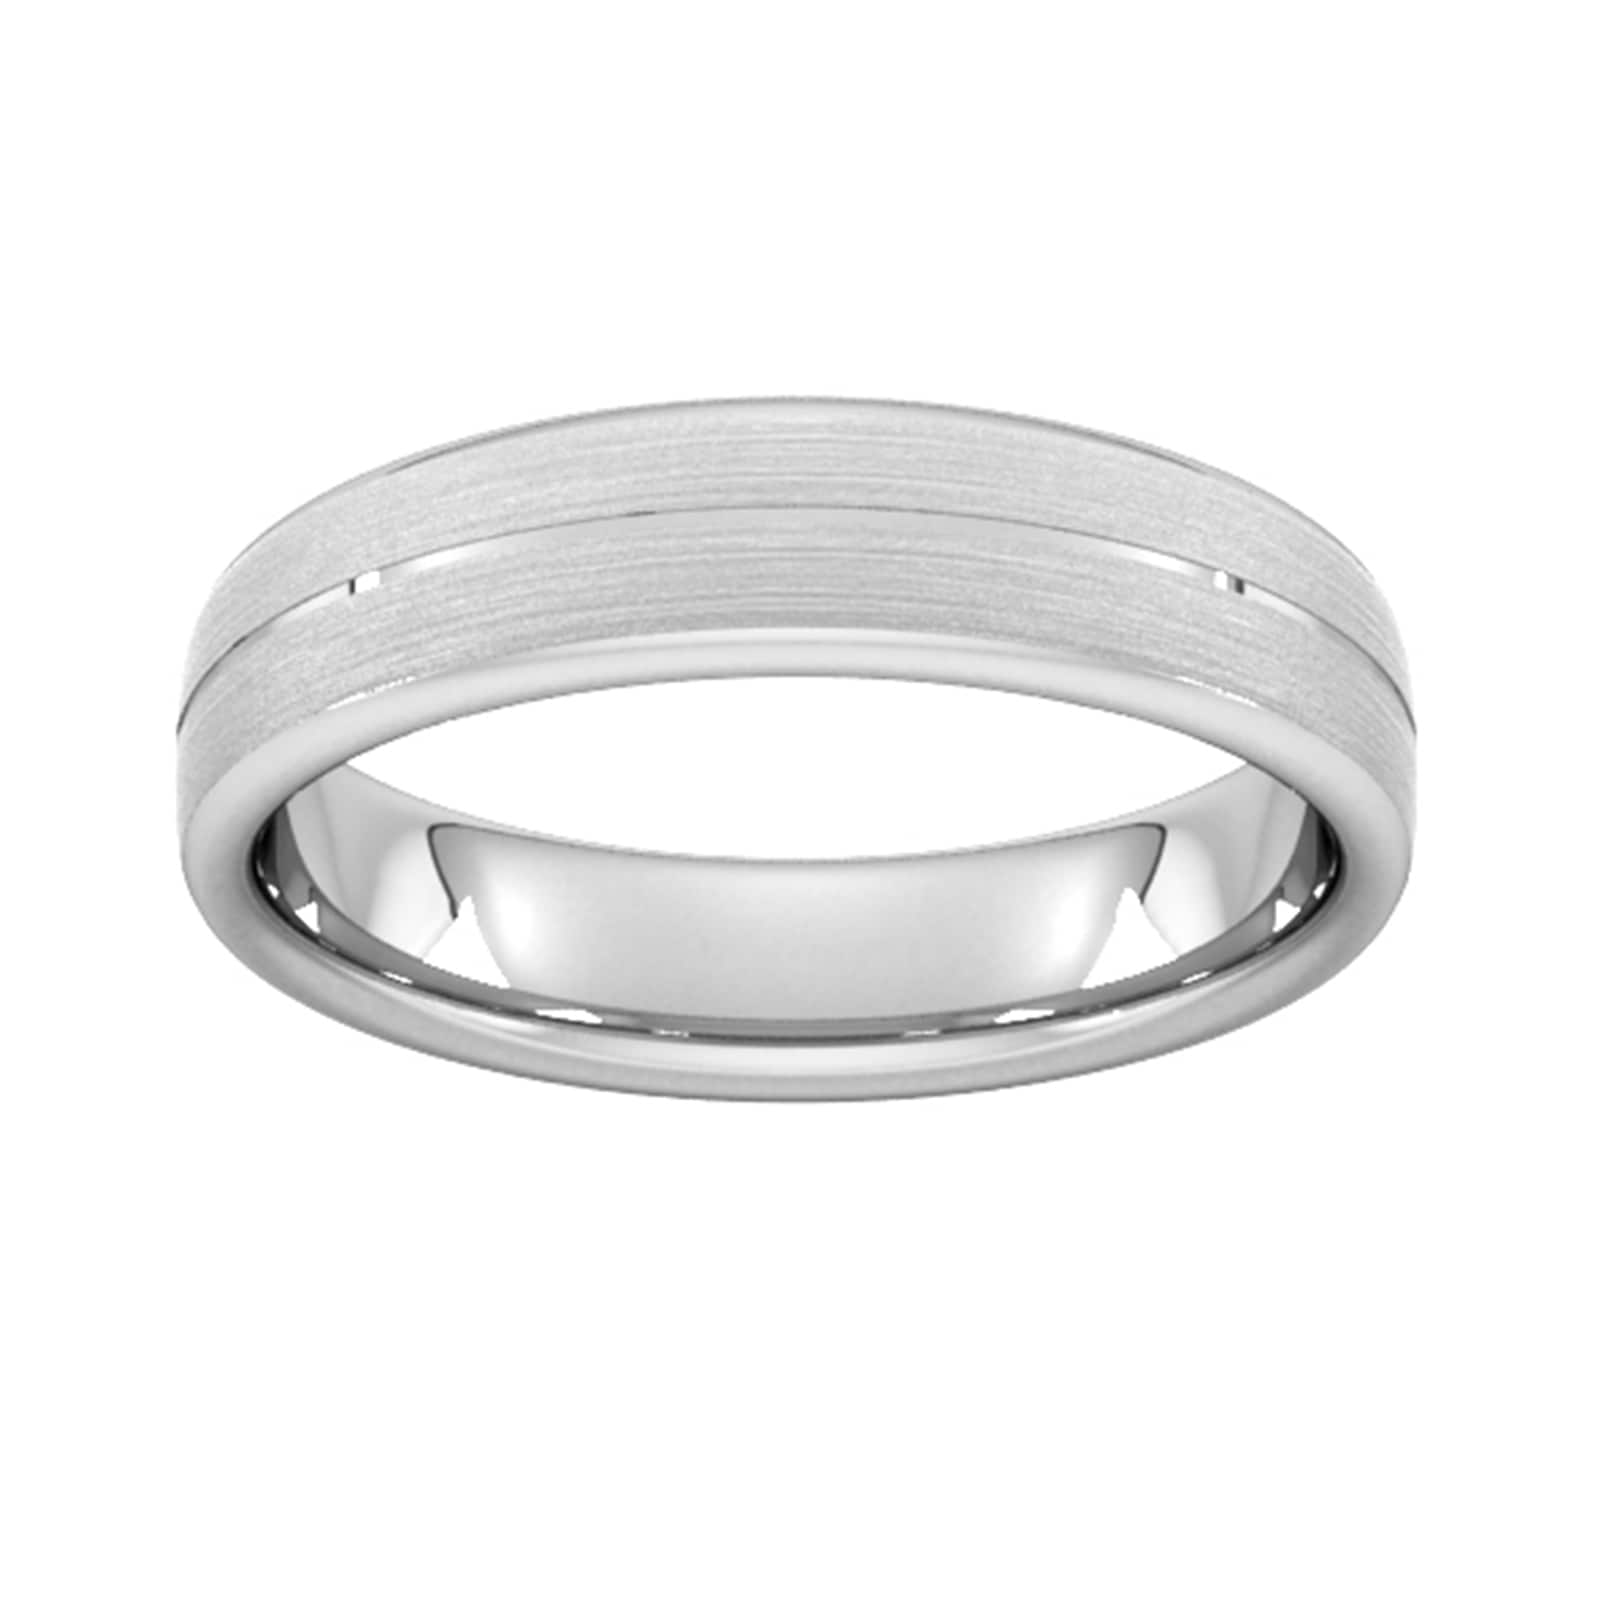 5mm D Shape Standard Centre Groove With Chamfered Edge Wedding Ring In 9 Carat White Gold - Ring Size U